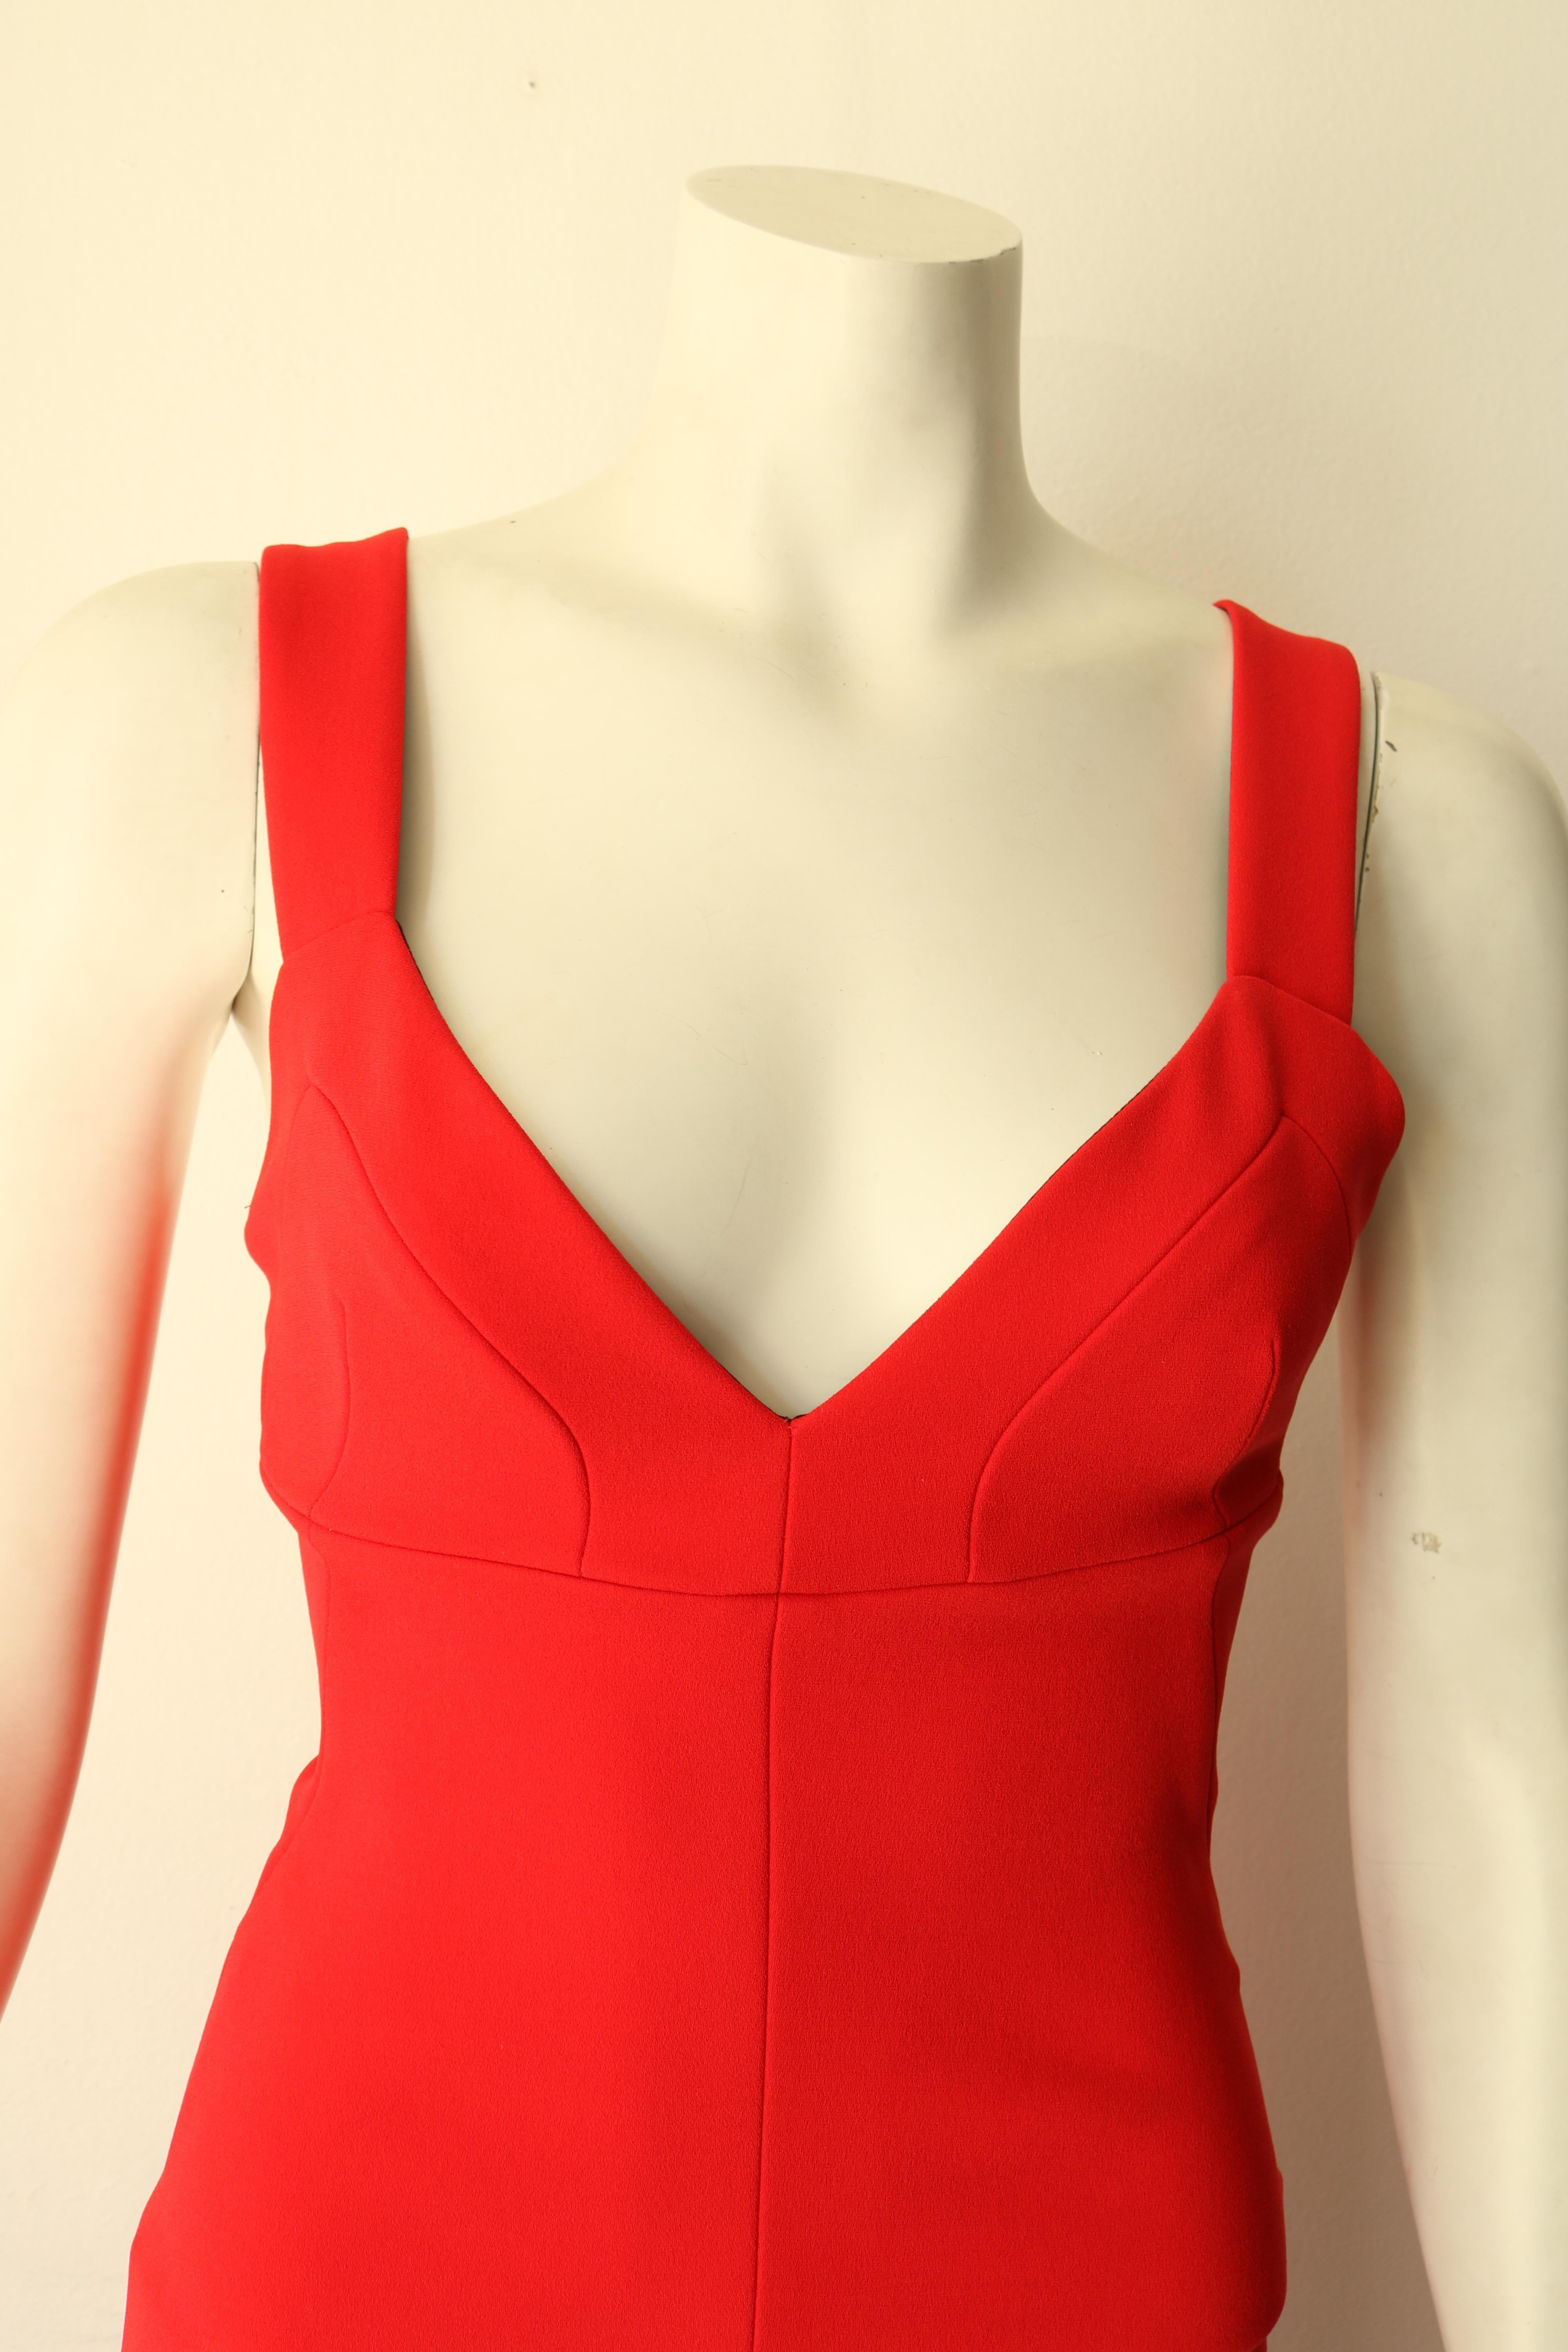 Amazing Red, Cocktail Victoria Beckham Dress with sweetheart neckline 
Tags still on, NBW
Retails over $2600 
Size 8 